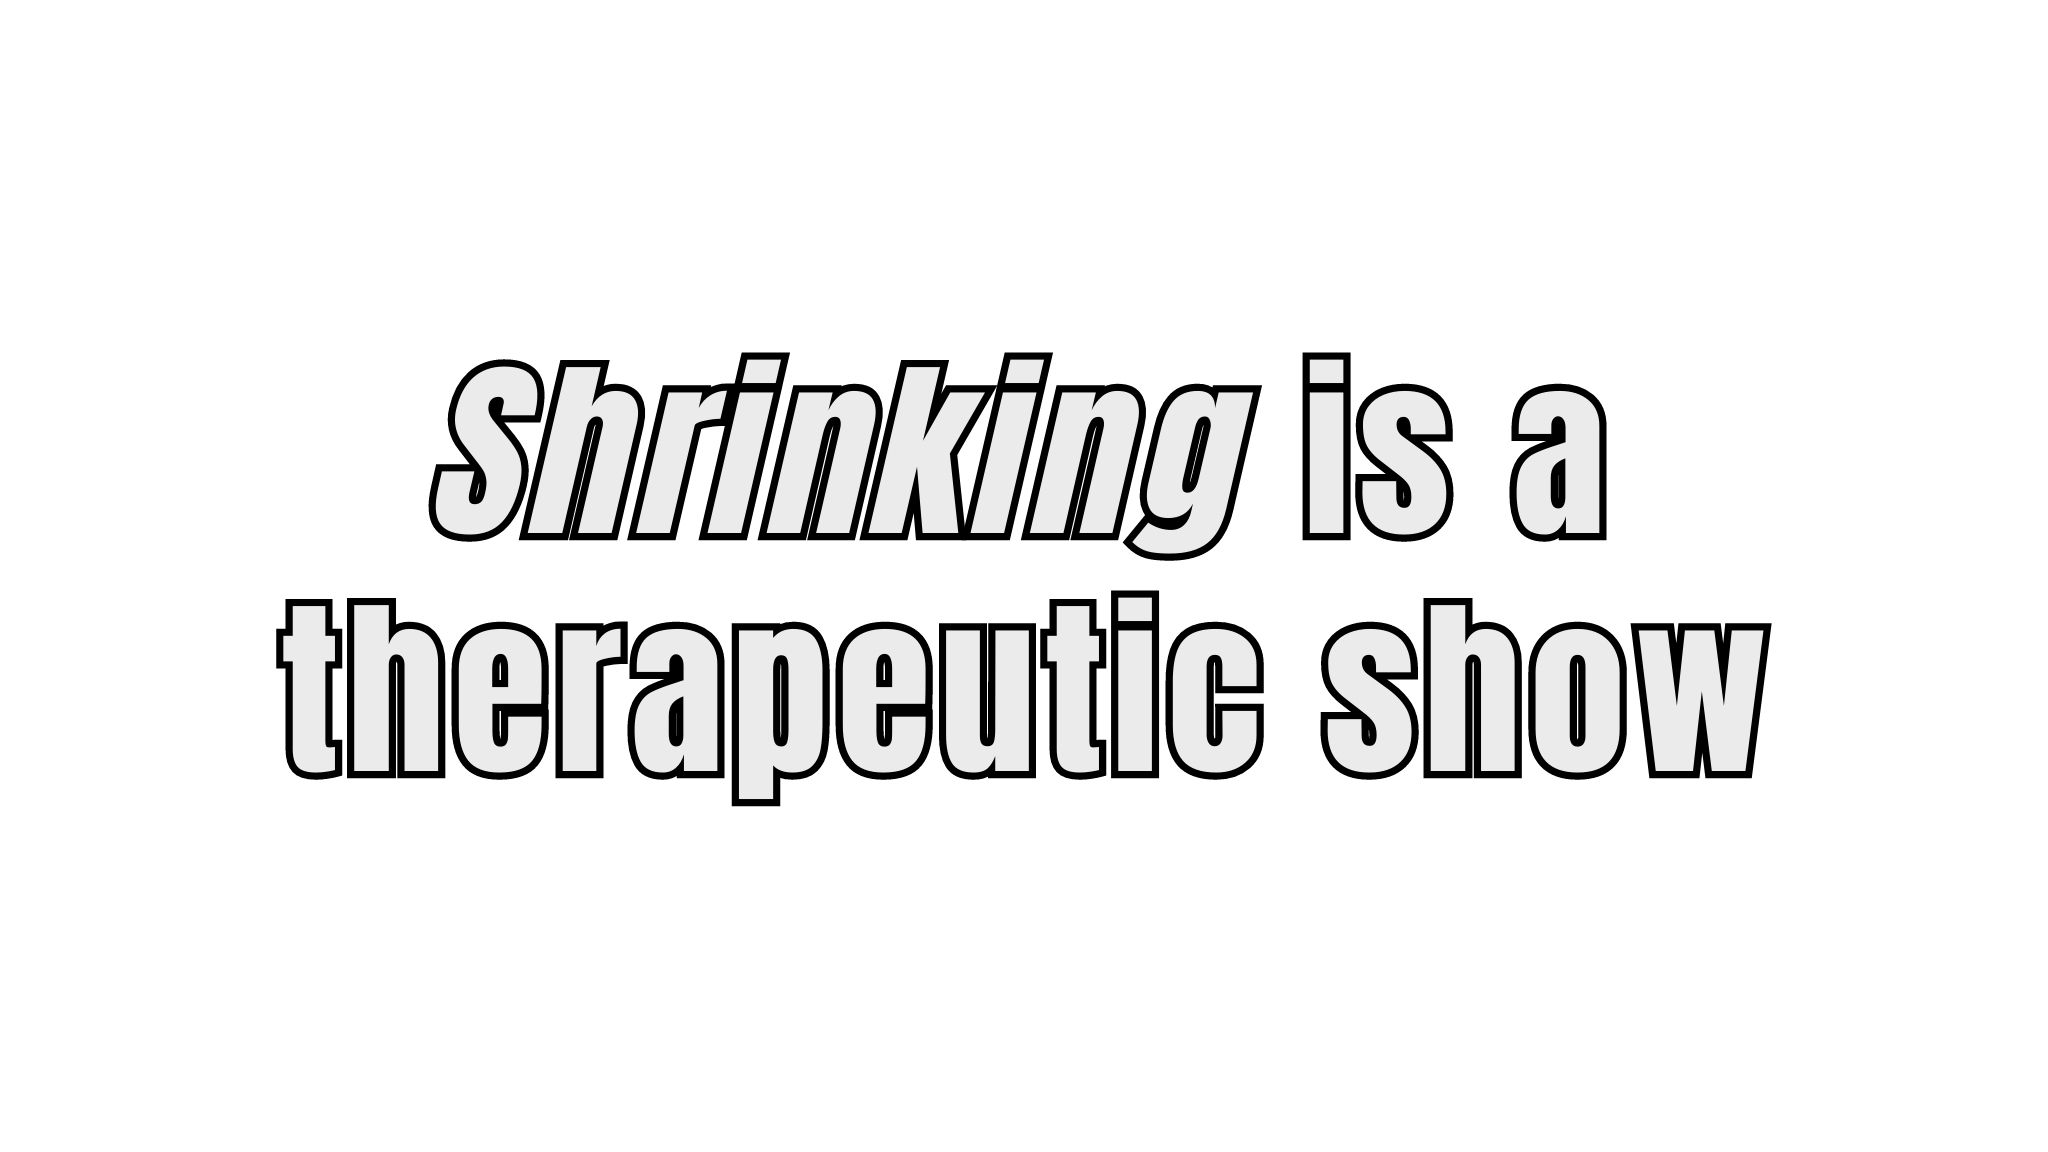 Shrinking: Is Writing Like Therapy Write Your Screenplay Podcast